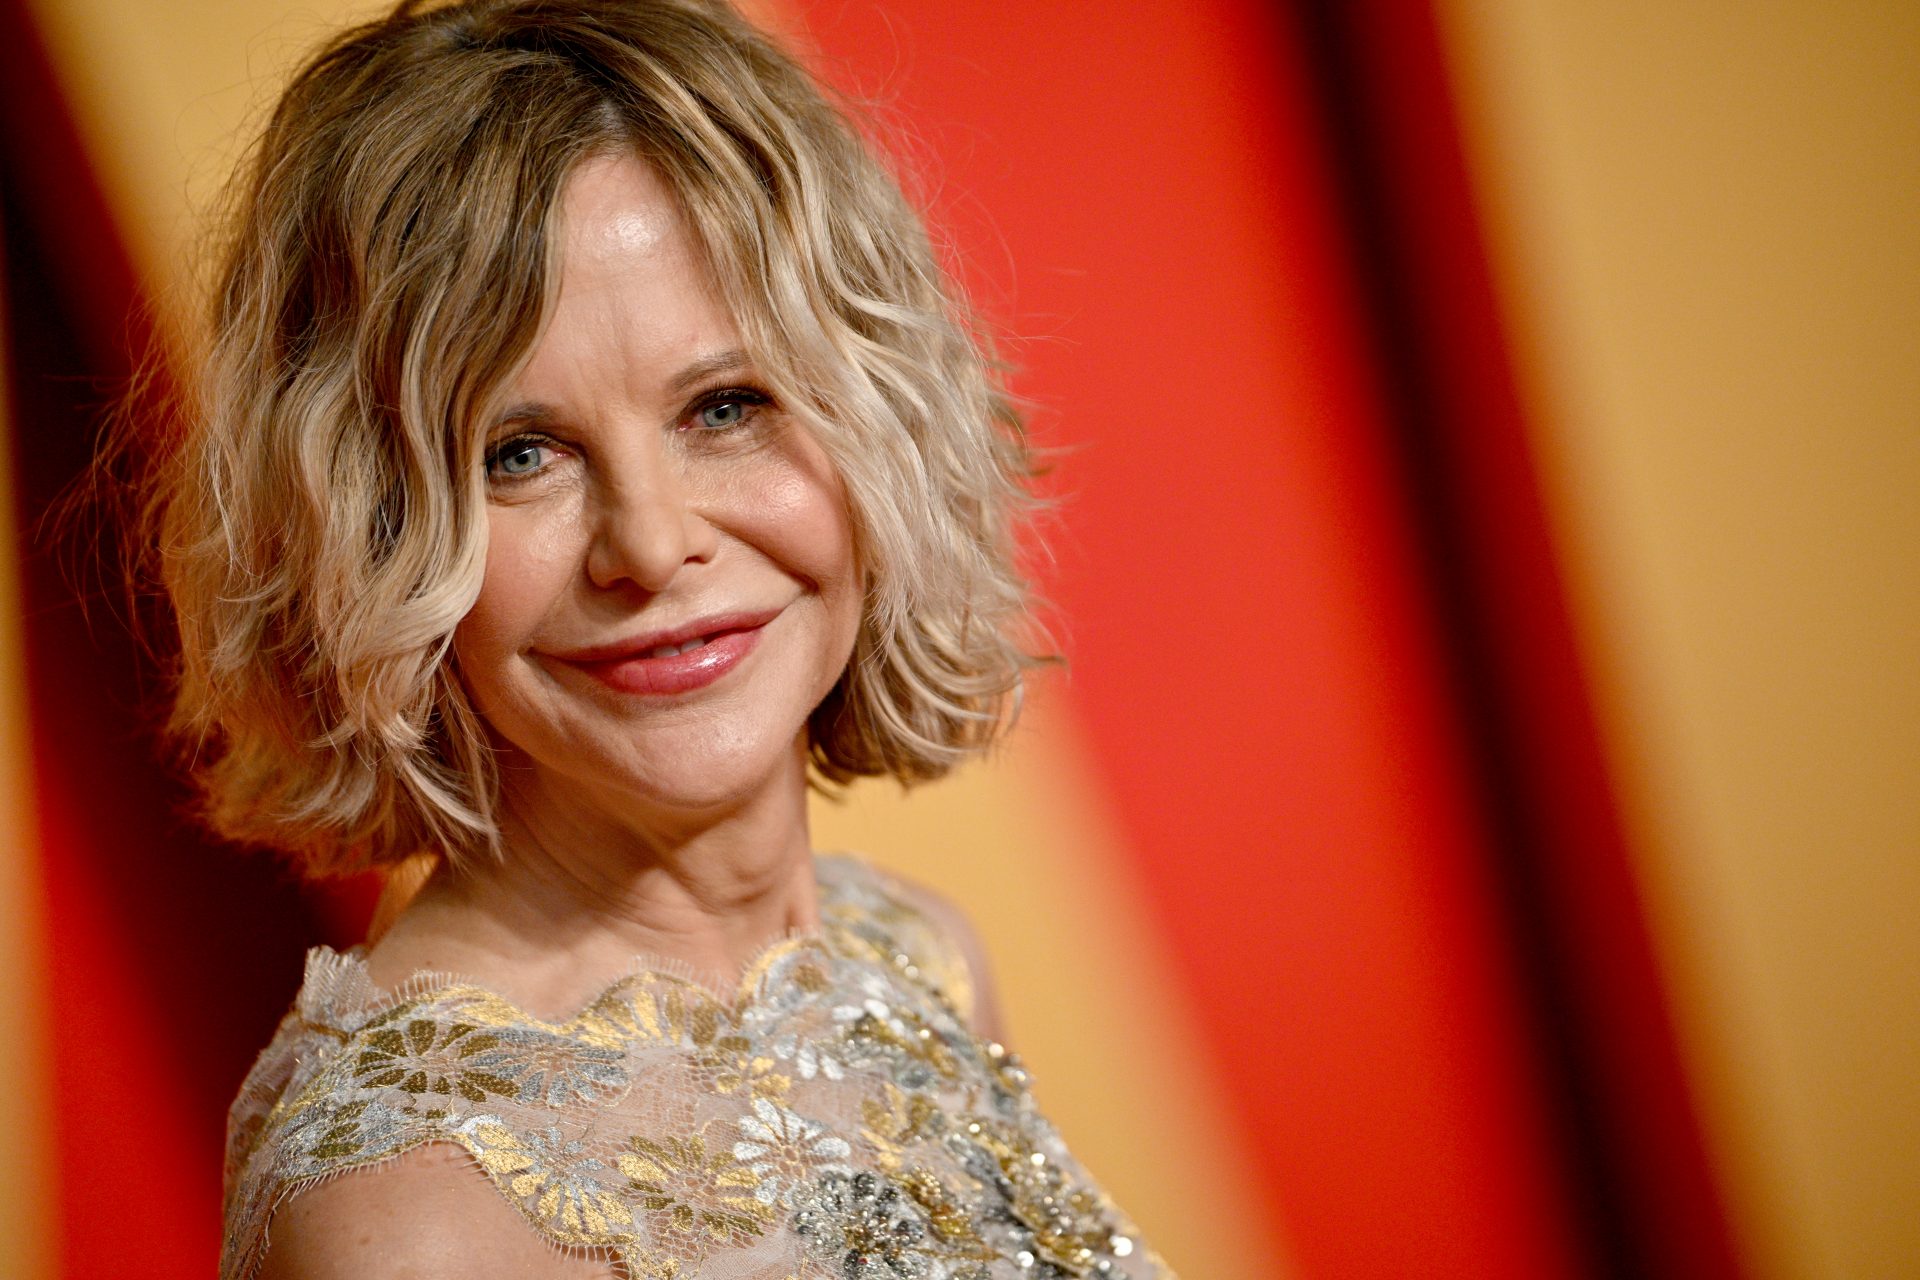 Meg Ryan: photos of her best films and changes over time